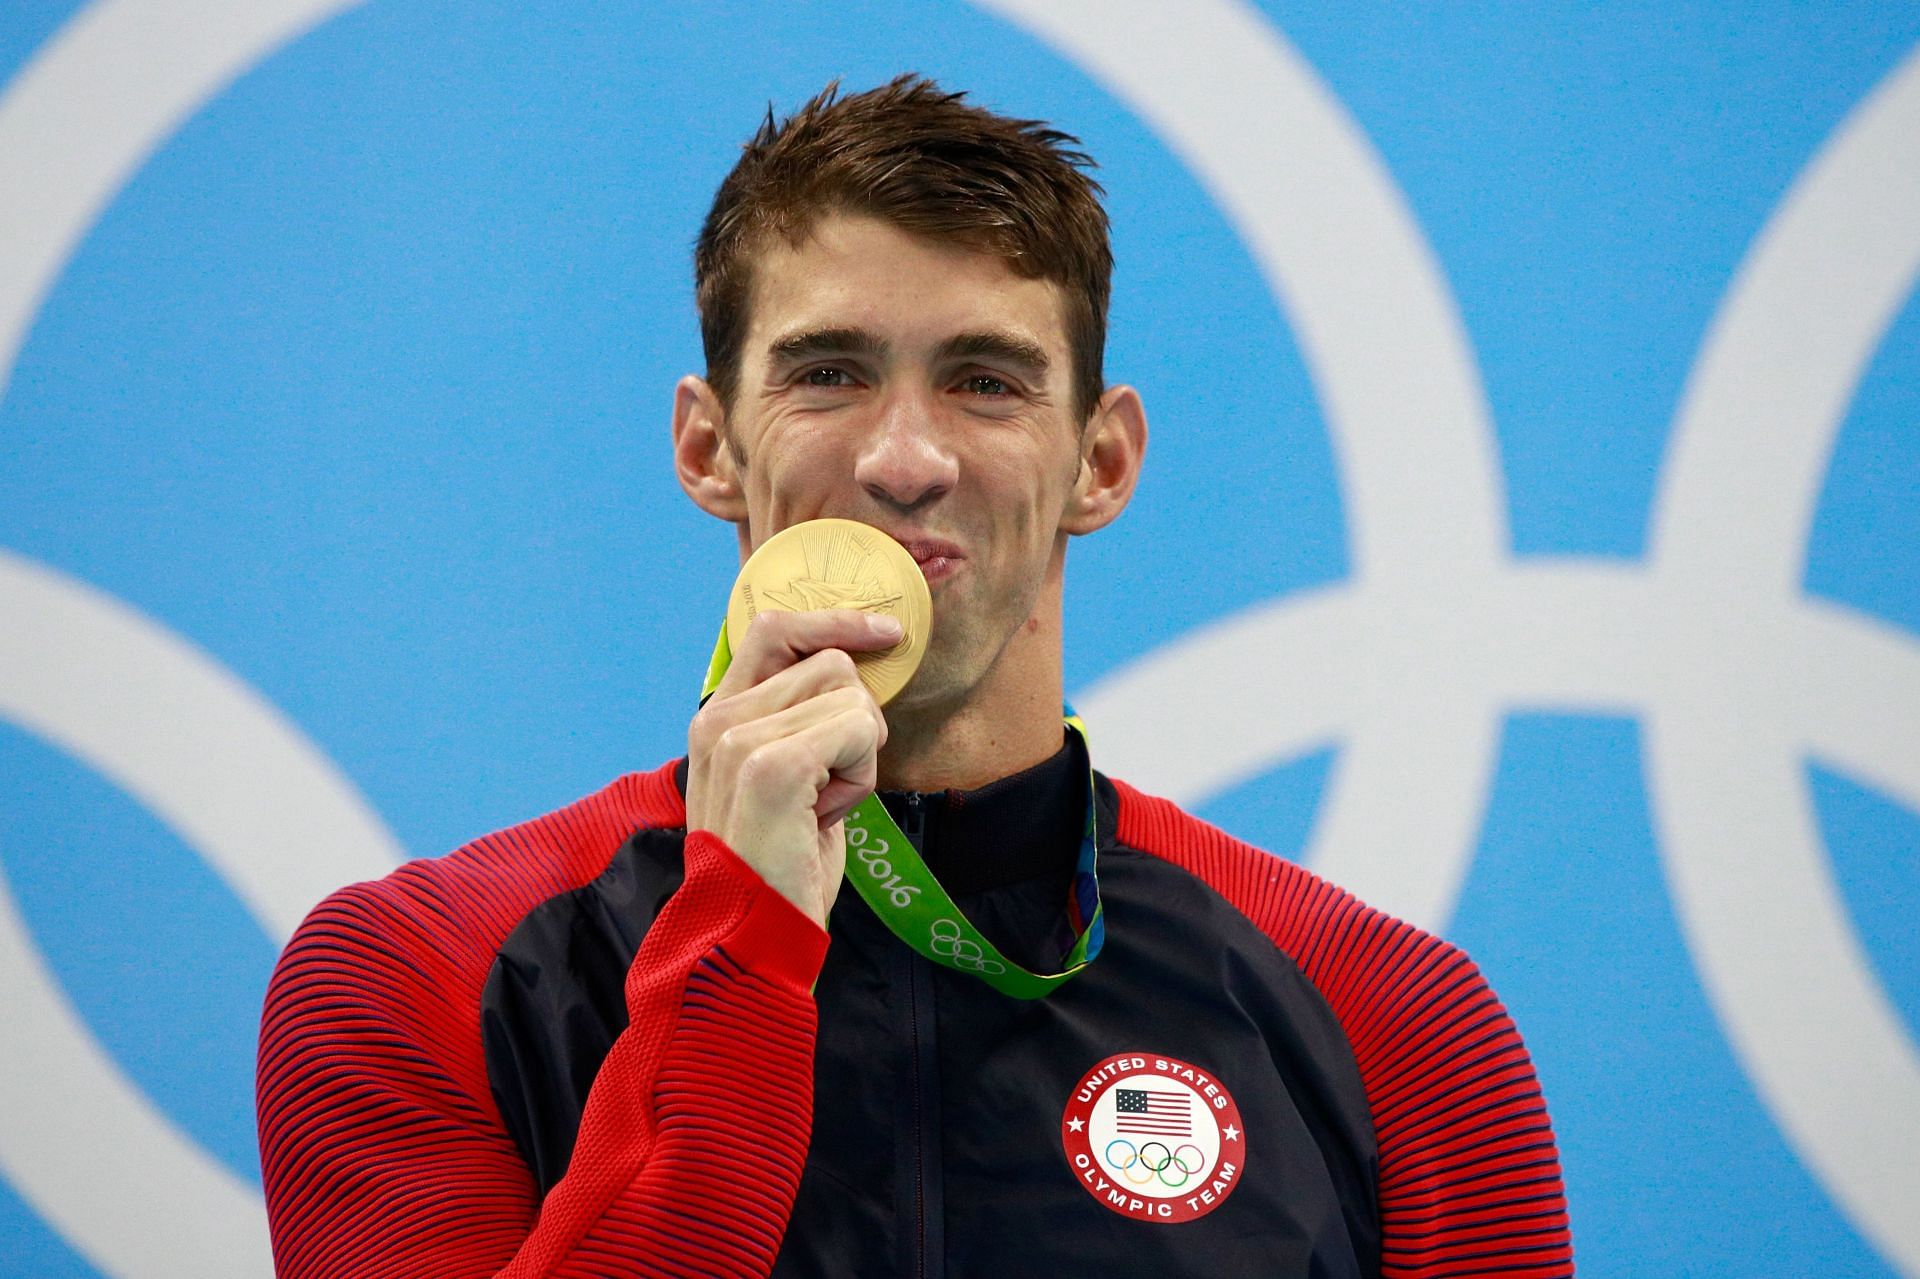 Michael Phelps of the United States celebrates on the podium during the medal ceremony for the Men&#039;s 200m Individual Medley at the 2016 Olympic Games in Rio de Janeiro, Brazil.